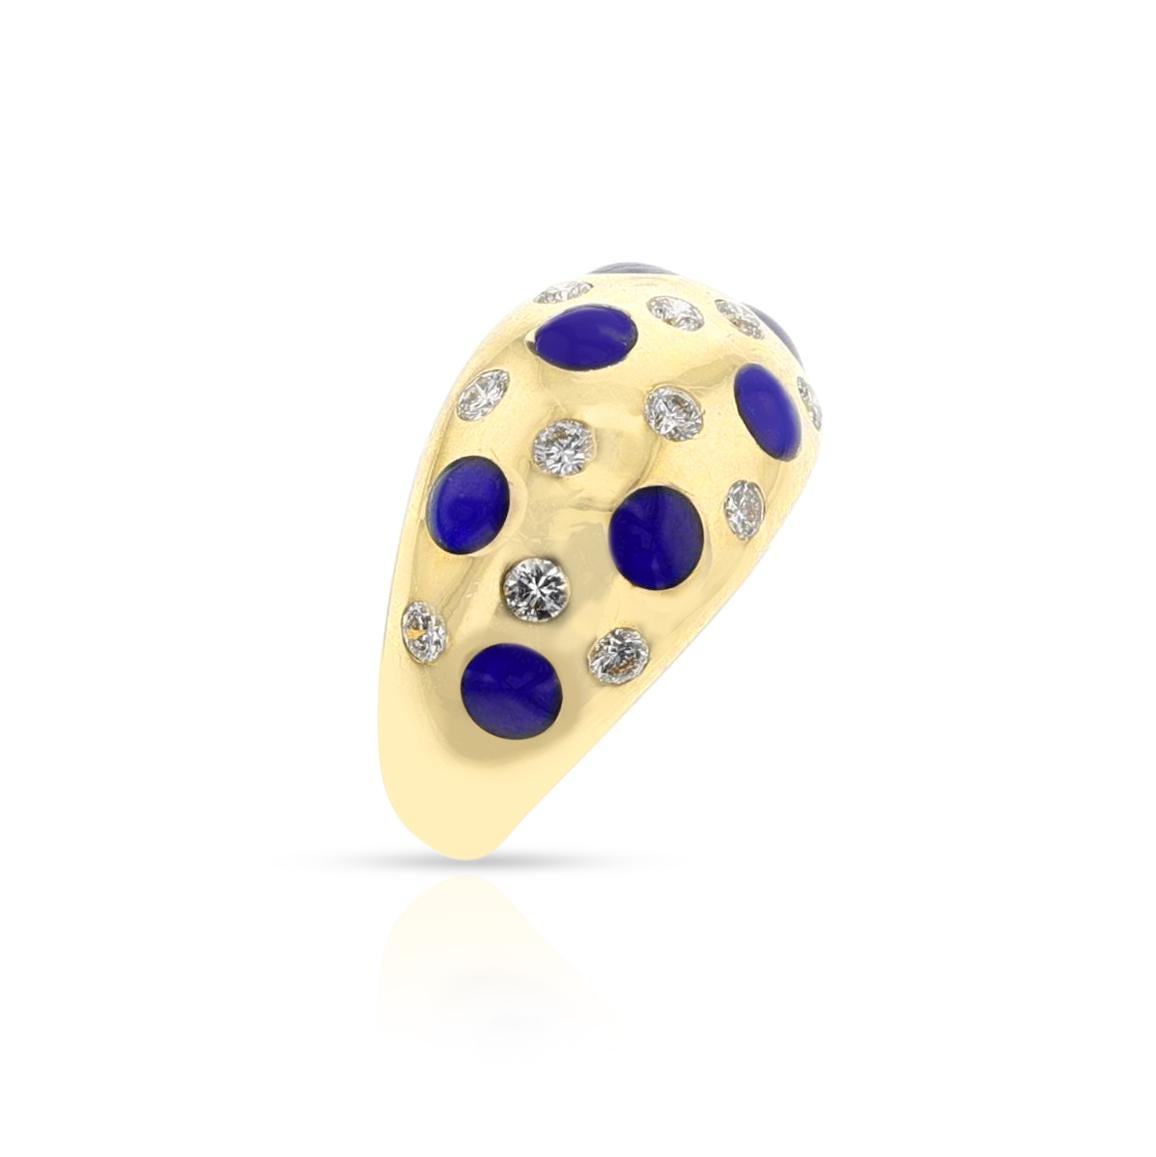 Van Cleef & Arpels Plique a Jour Enamel and Diamond Earring and Ring Set, 18k For Sale 6